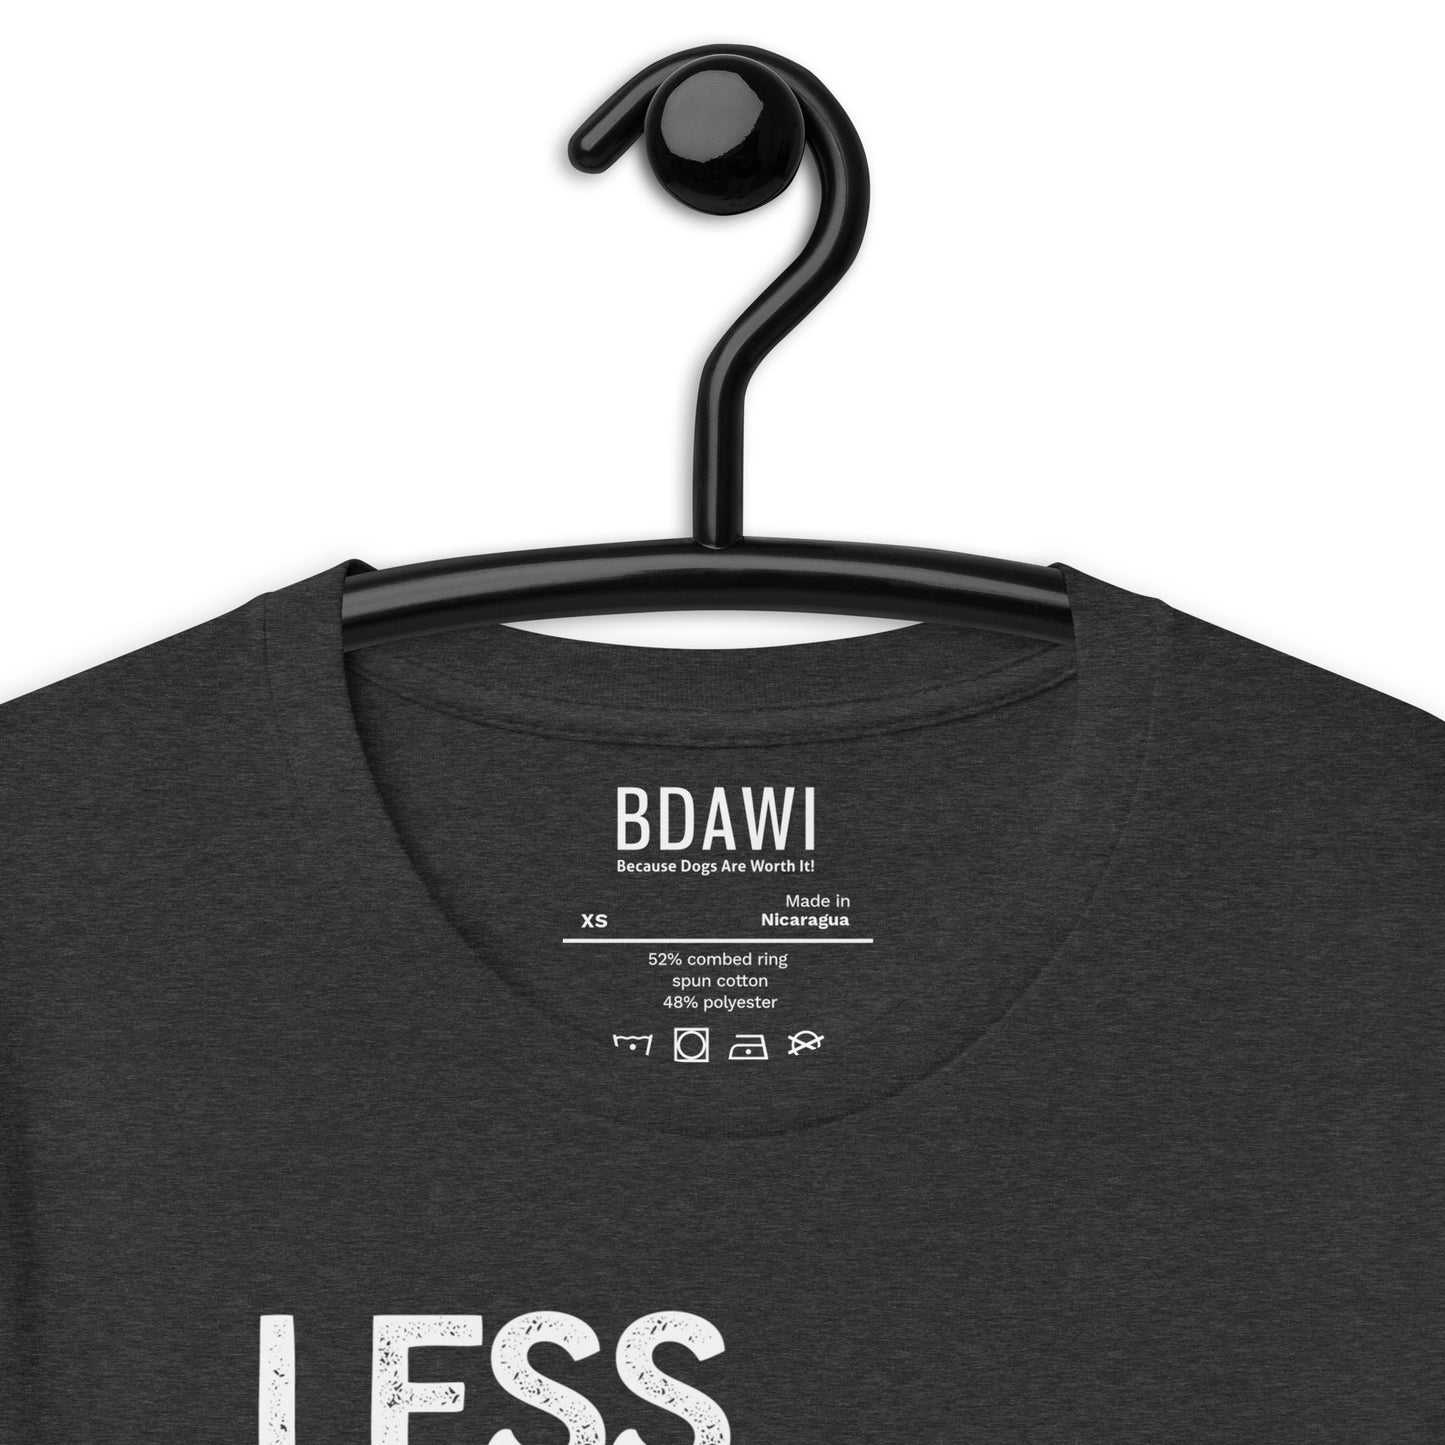 Less People More Dogs Tee